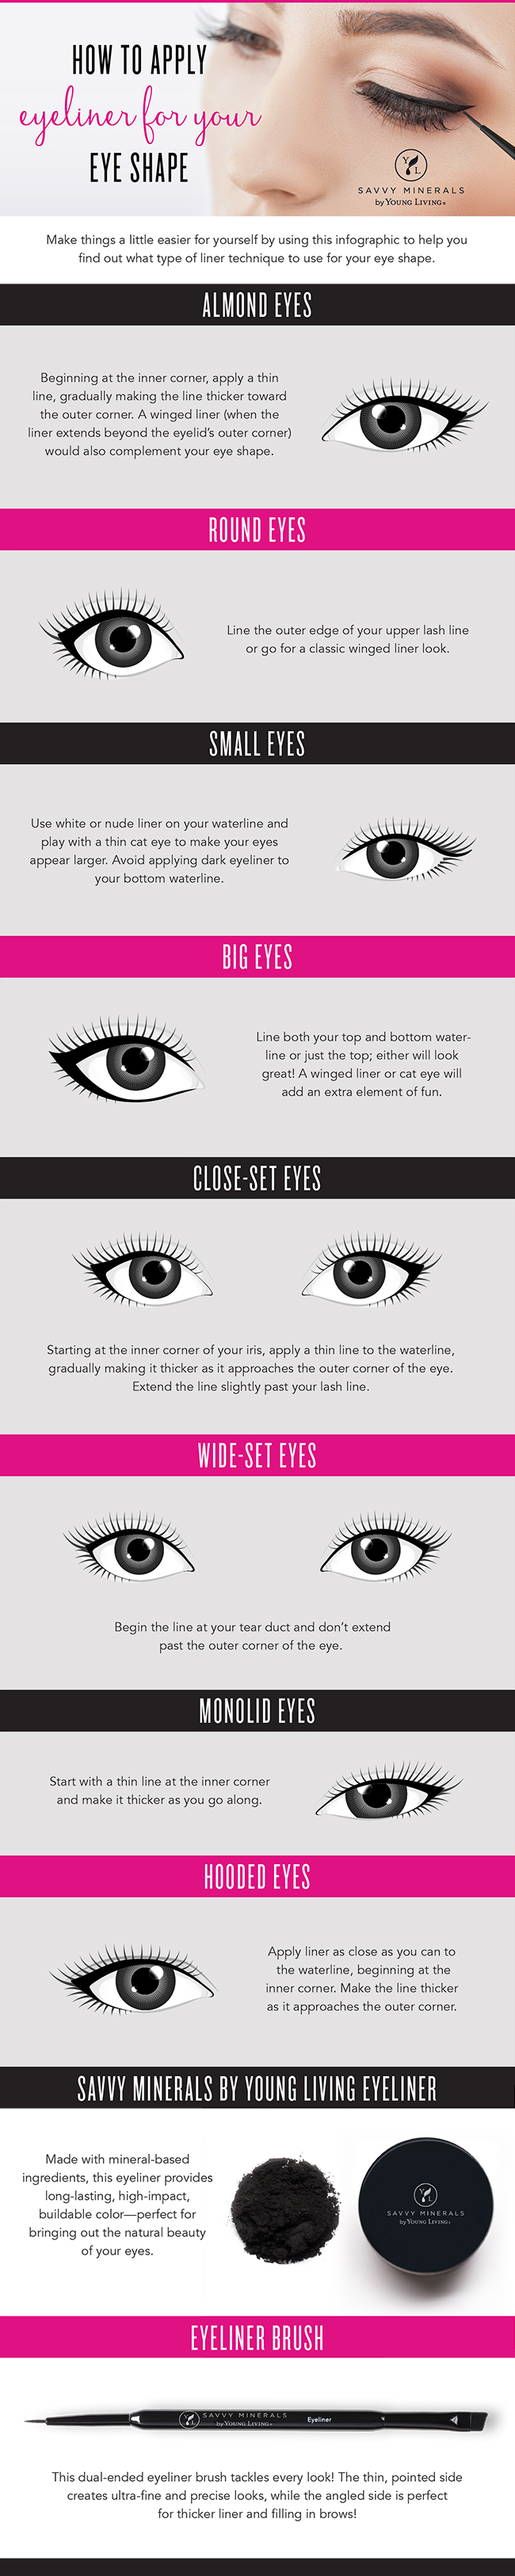 How to apply eyeliner for your eye